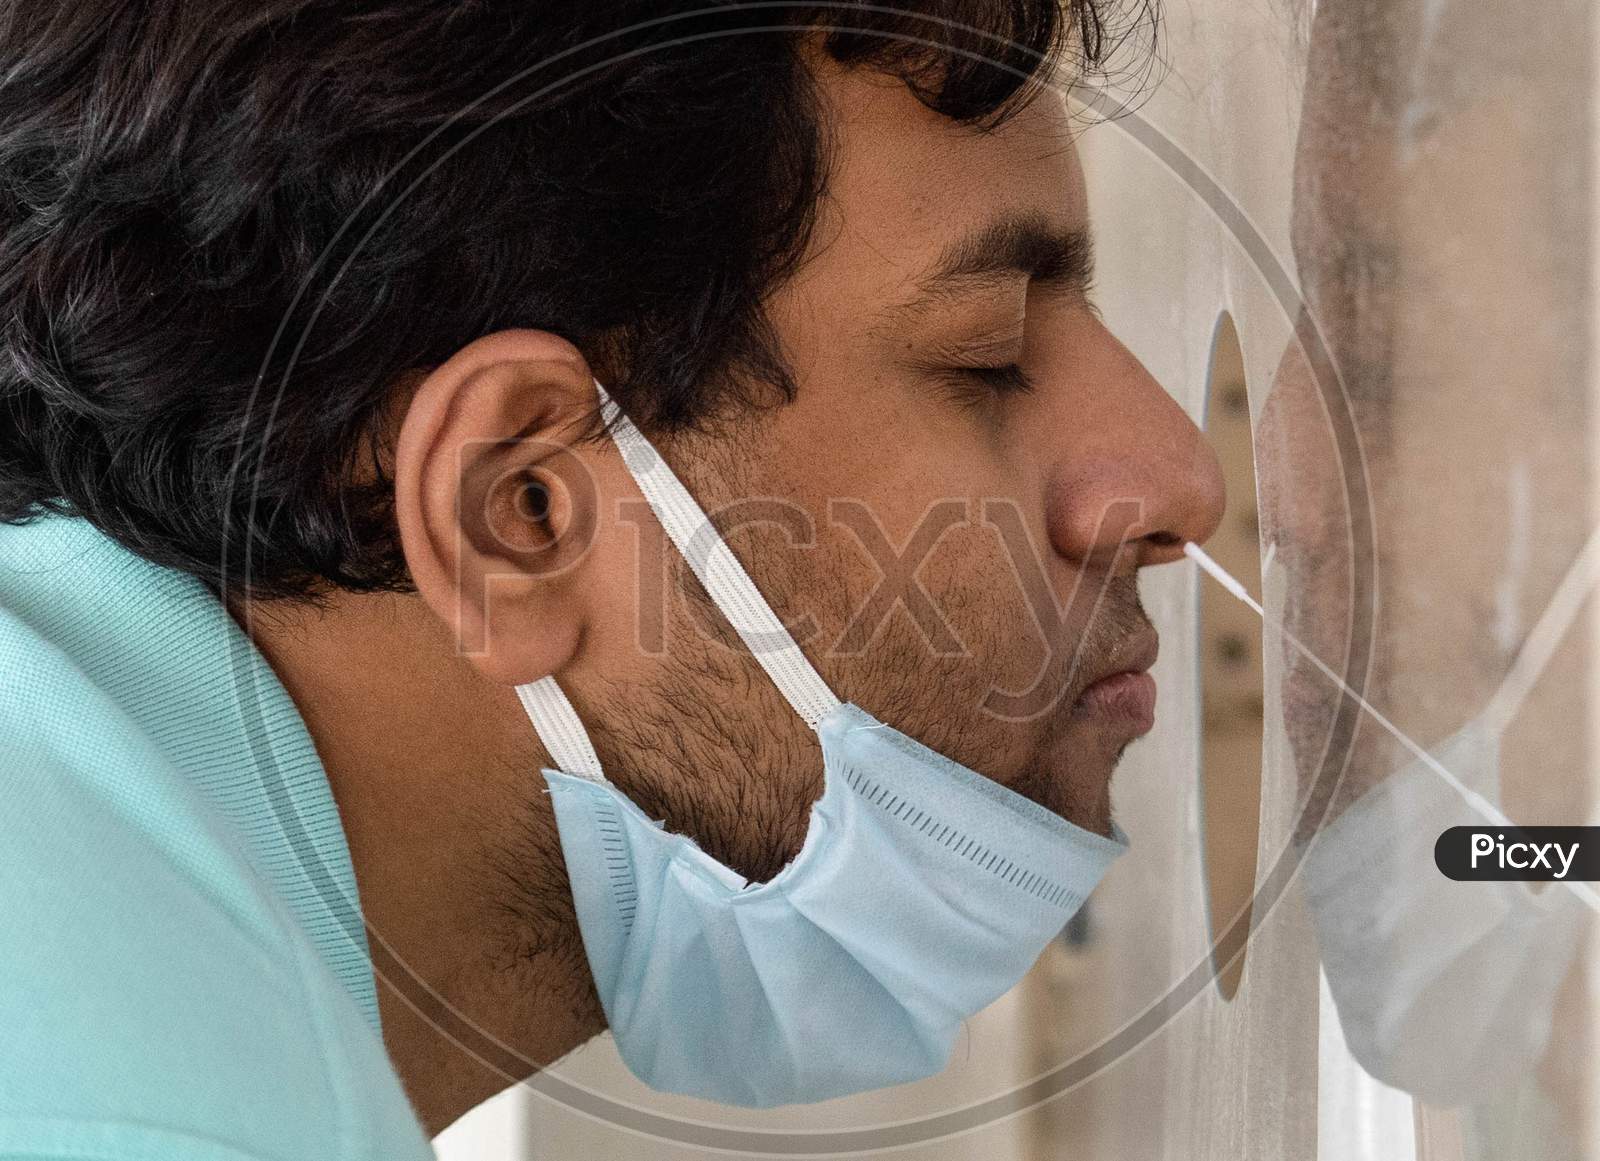 A Health Worker Collects Swab Sample From A Man For Covid-19 Antigen Test, At Mayur Vihar On June 29, 2020 In New Delhi, India.